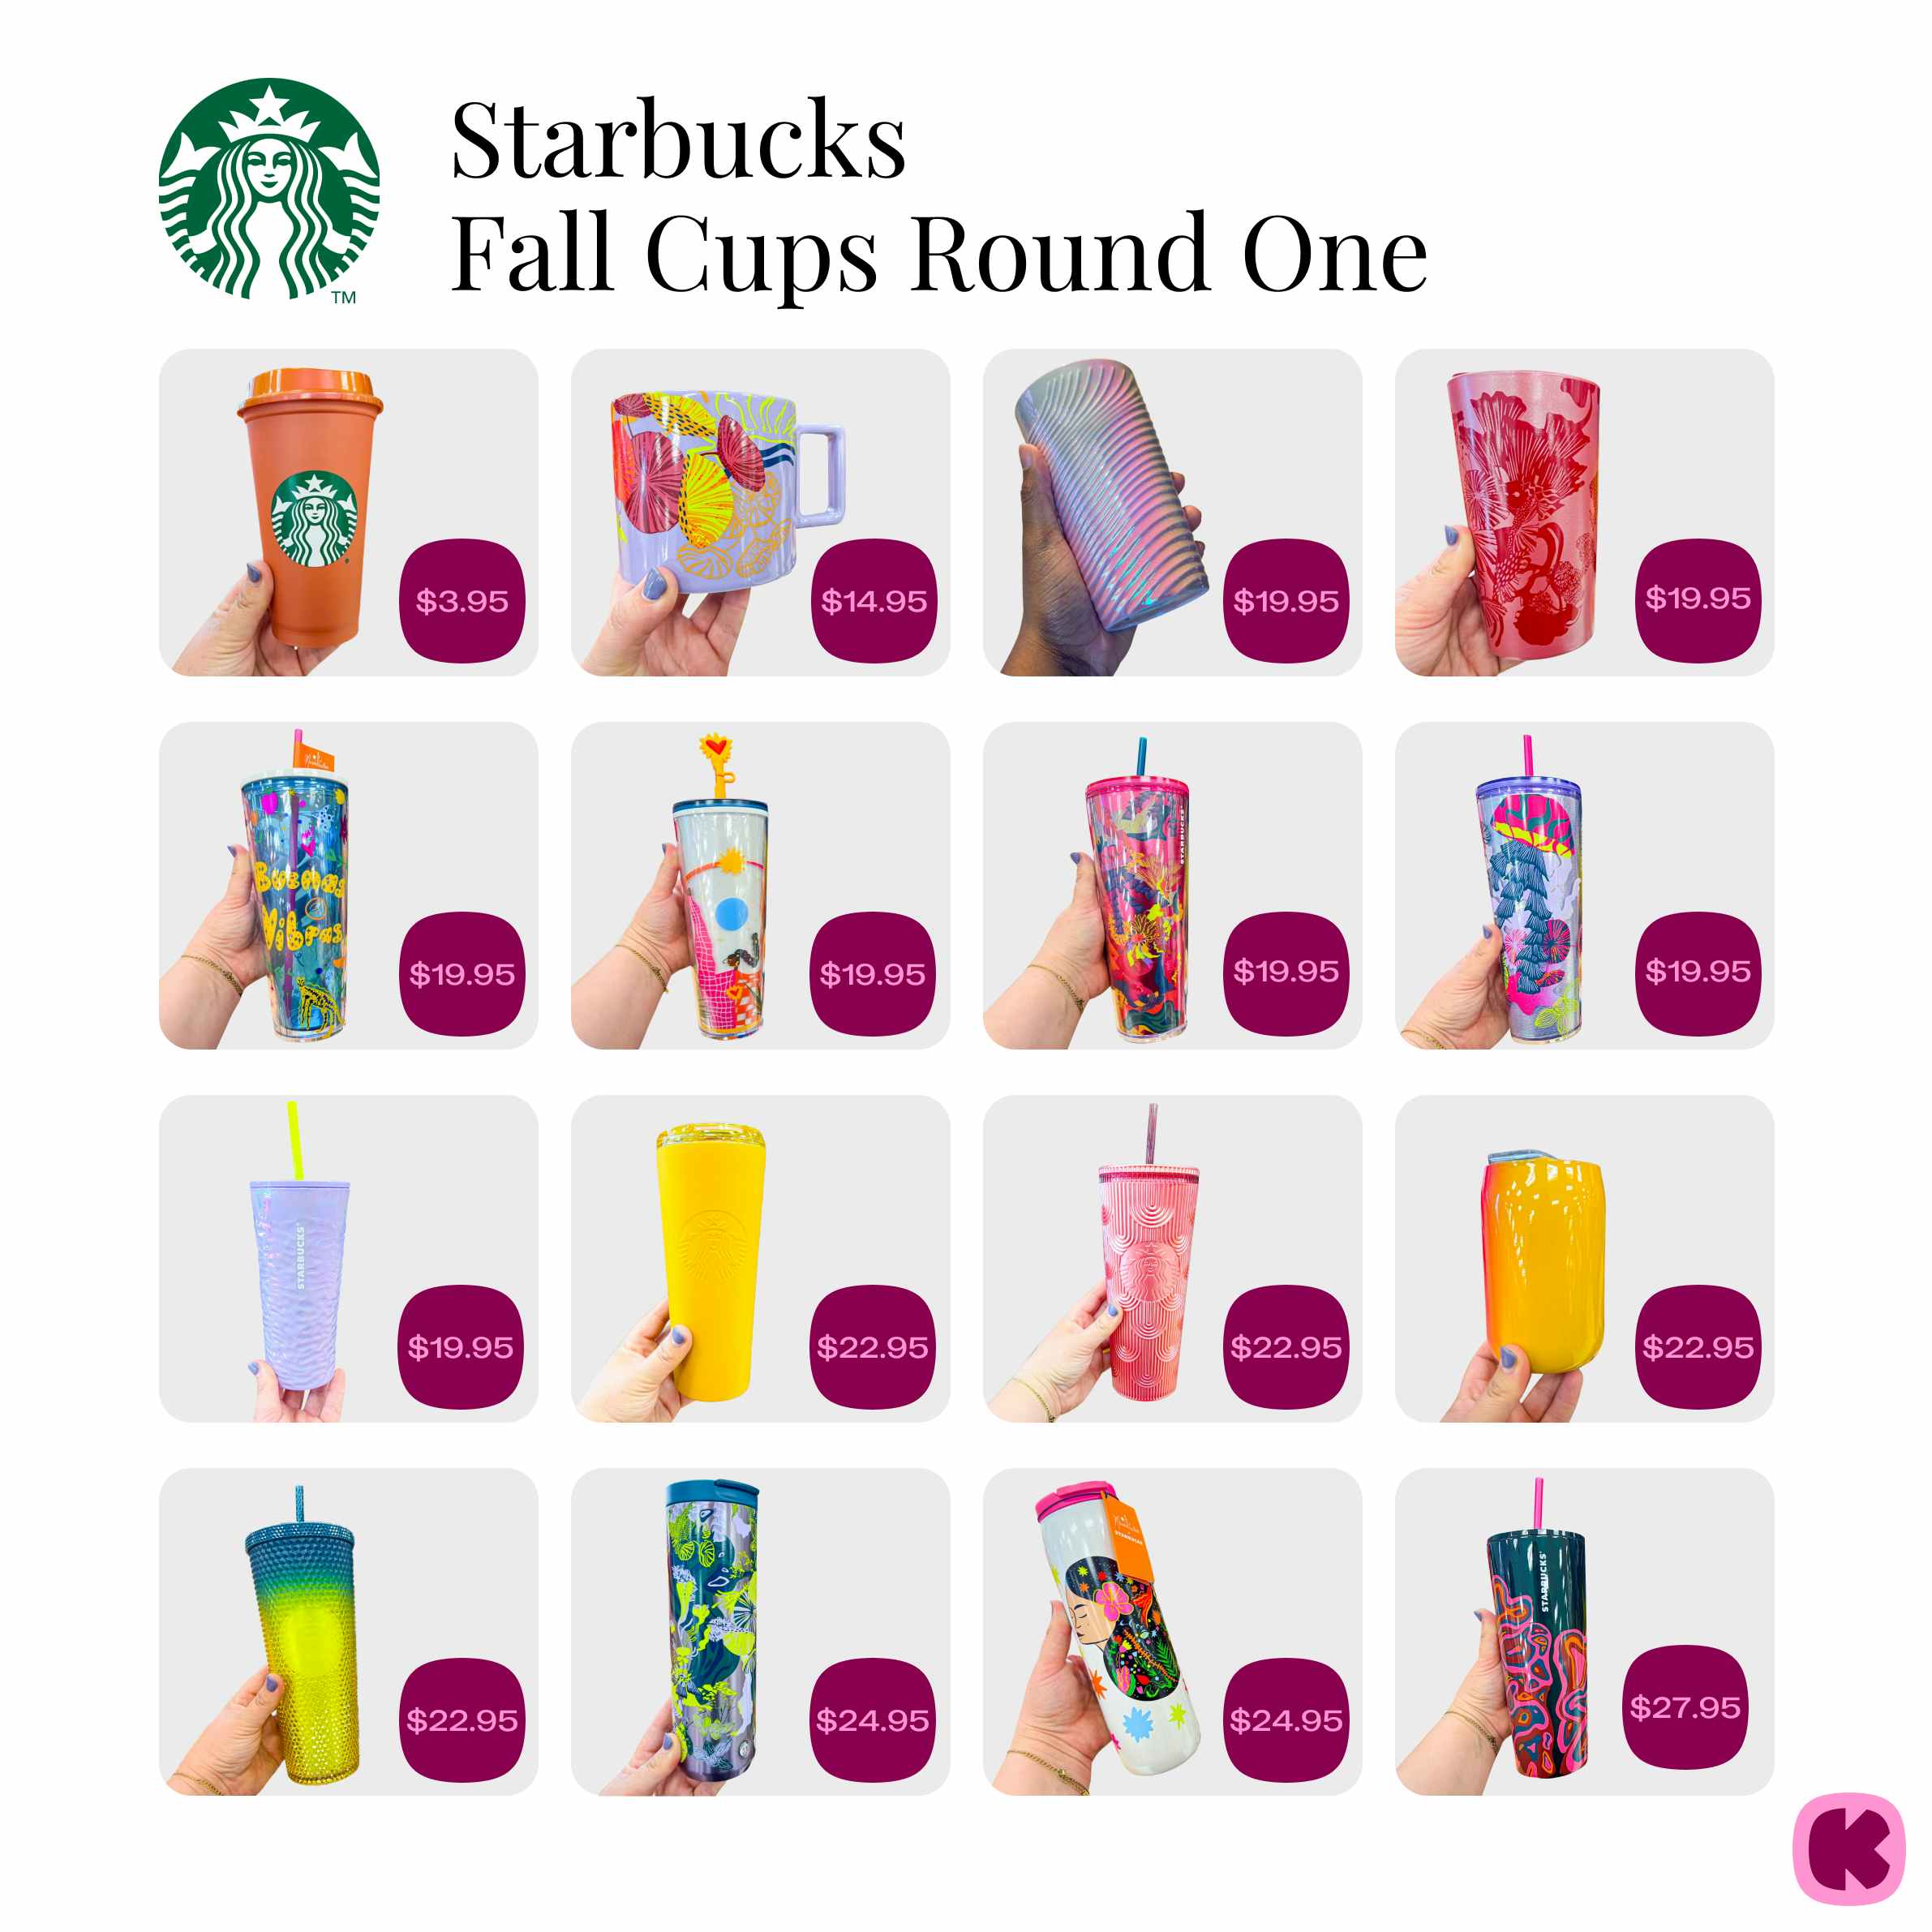 Starbucks fall cups round one graphic